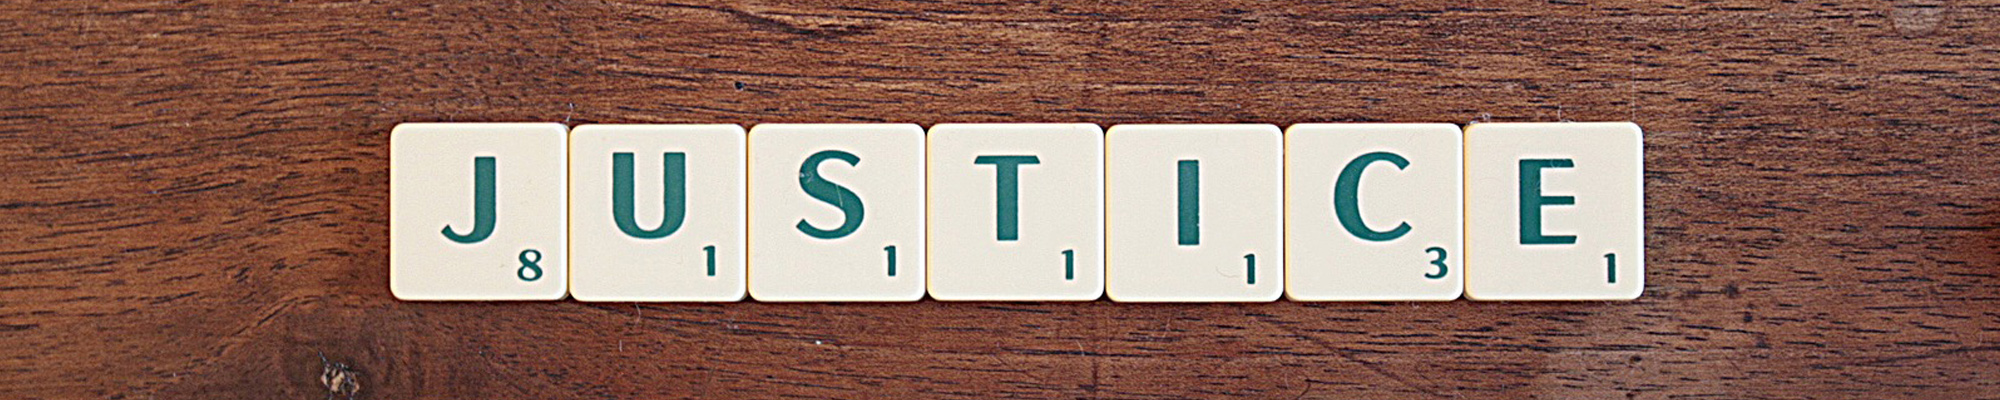 scrabble tiles that spell Justice